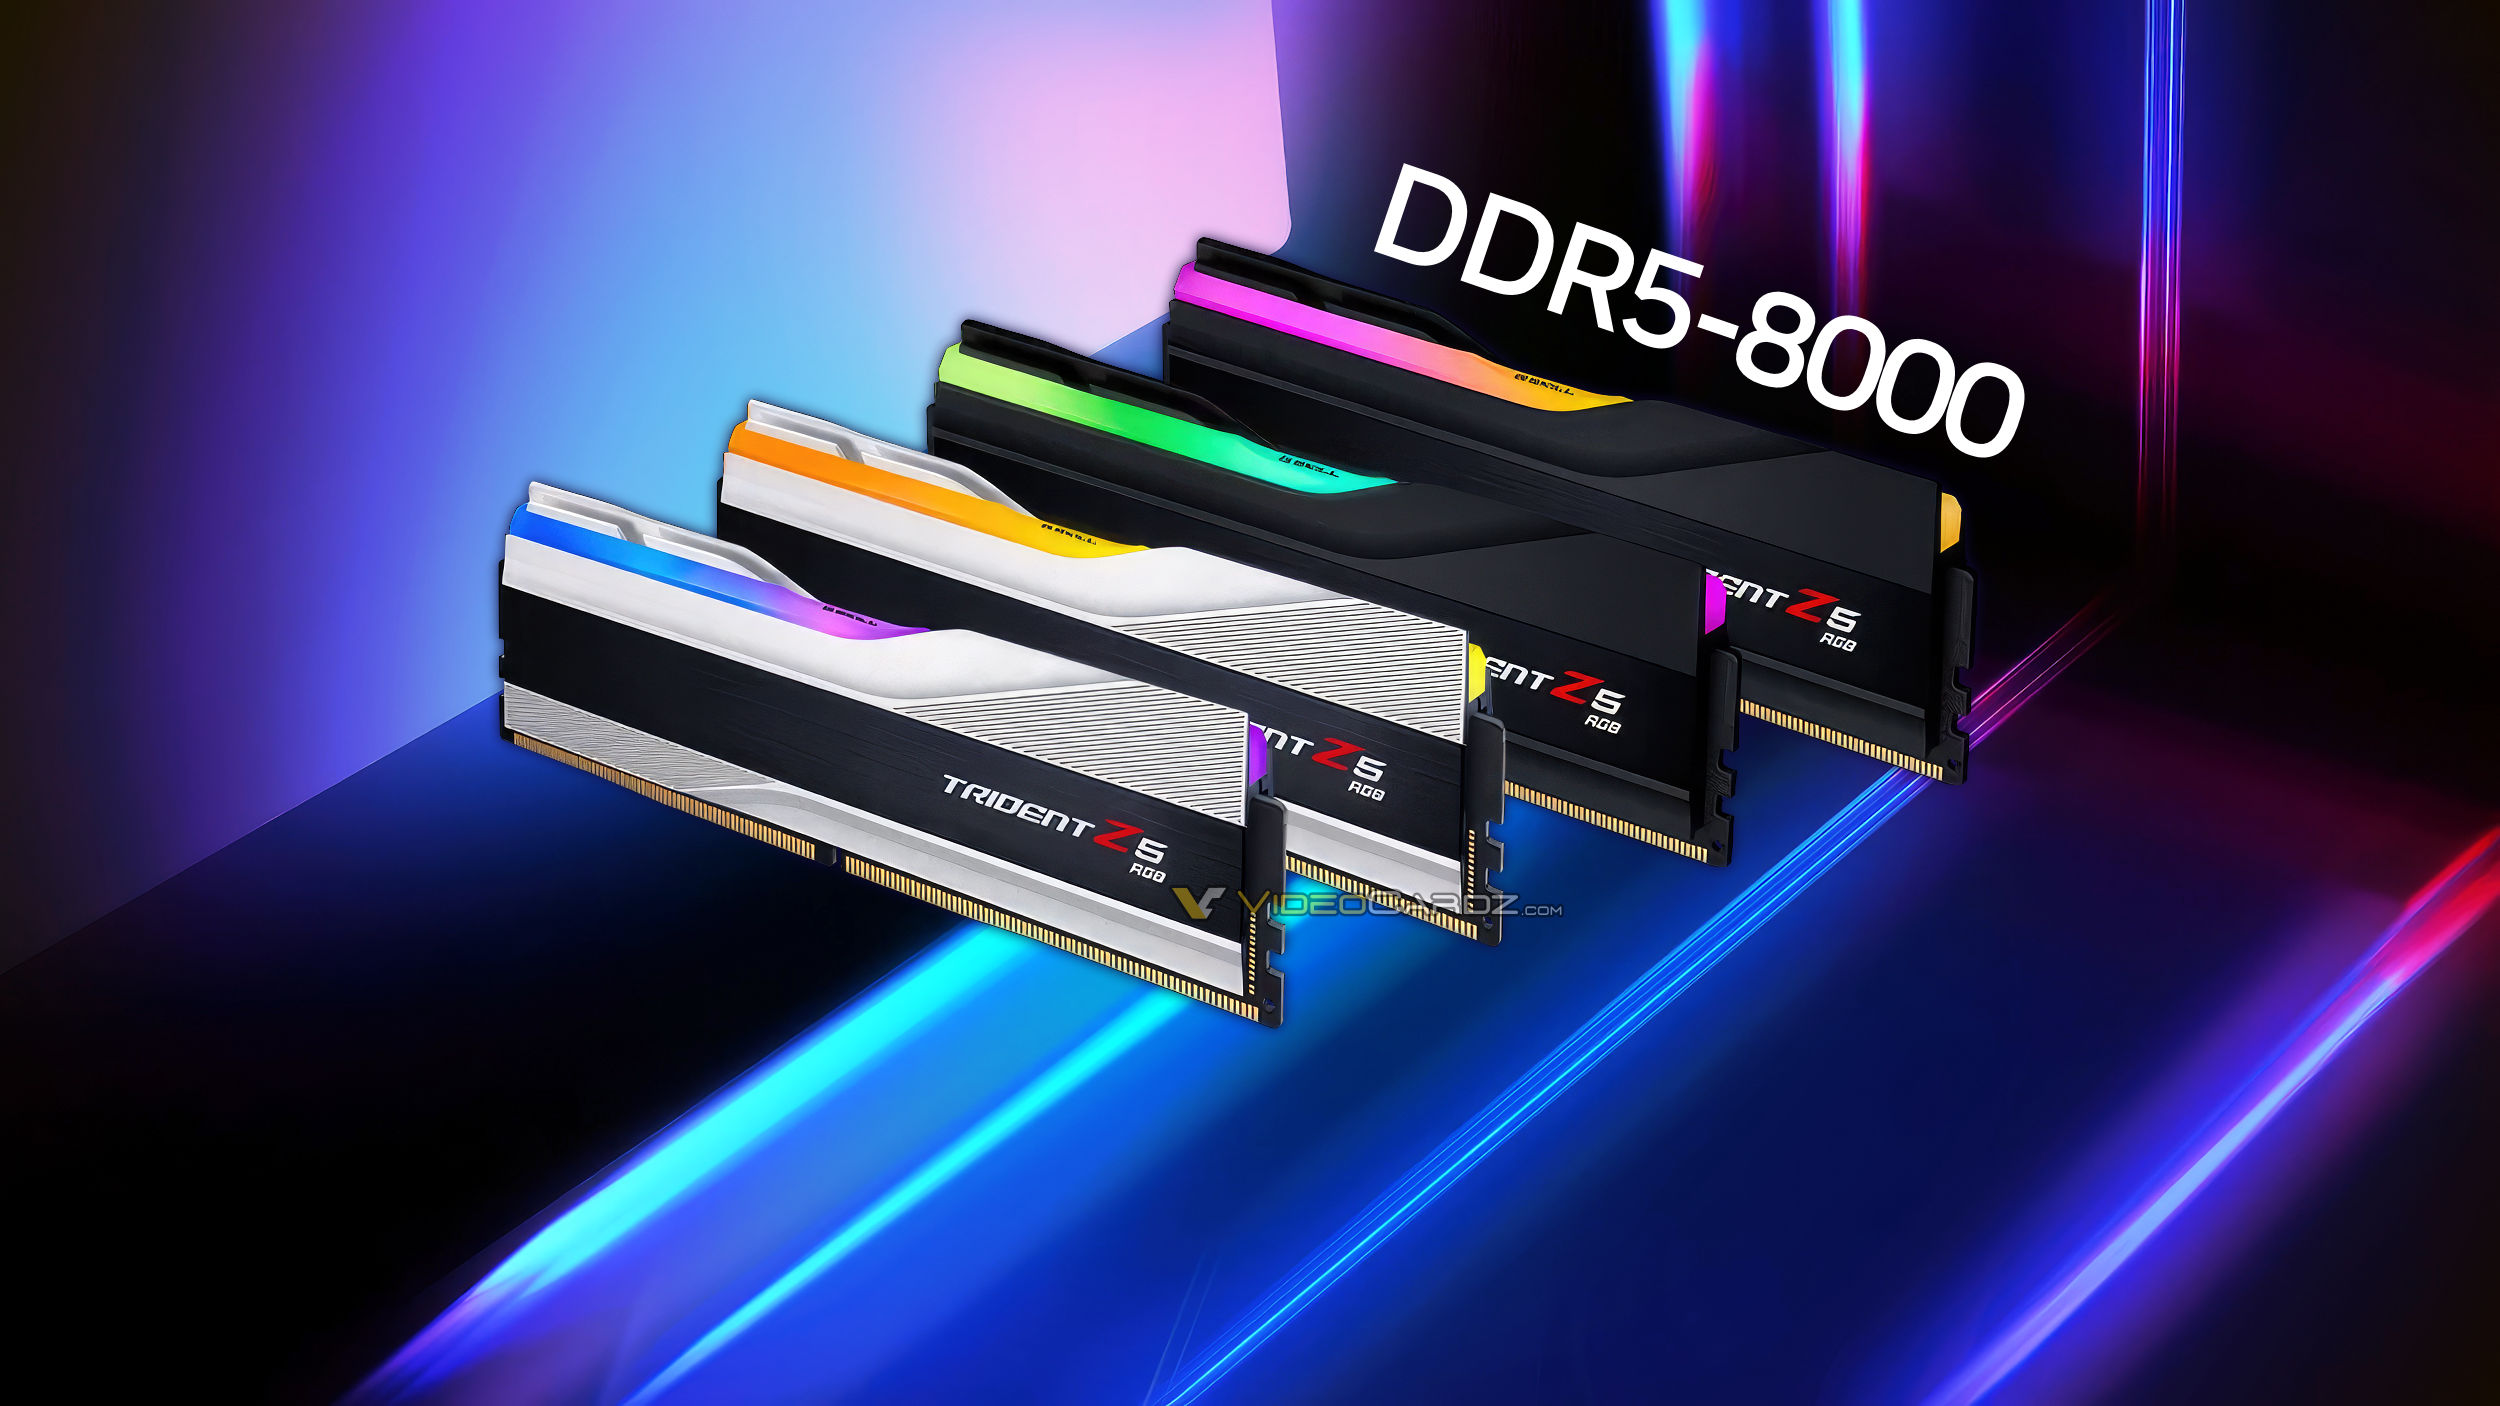 G.Skill announces DDR5-8000 CL38 2x24GB memory kit, launches 